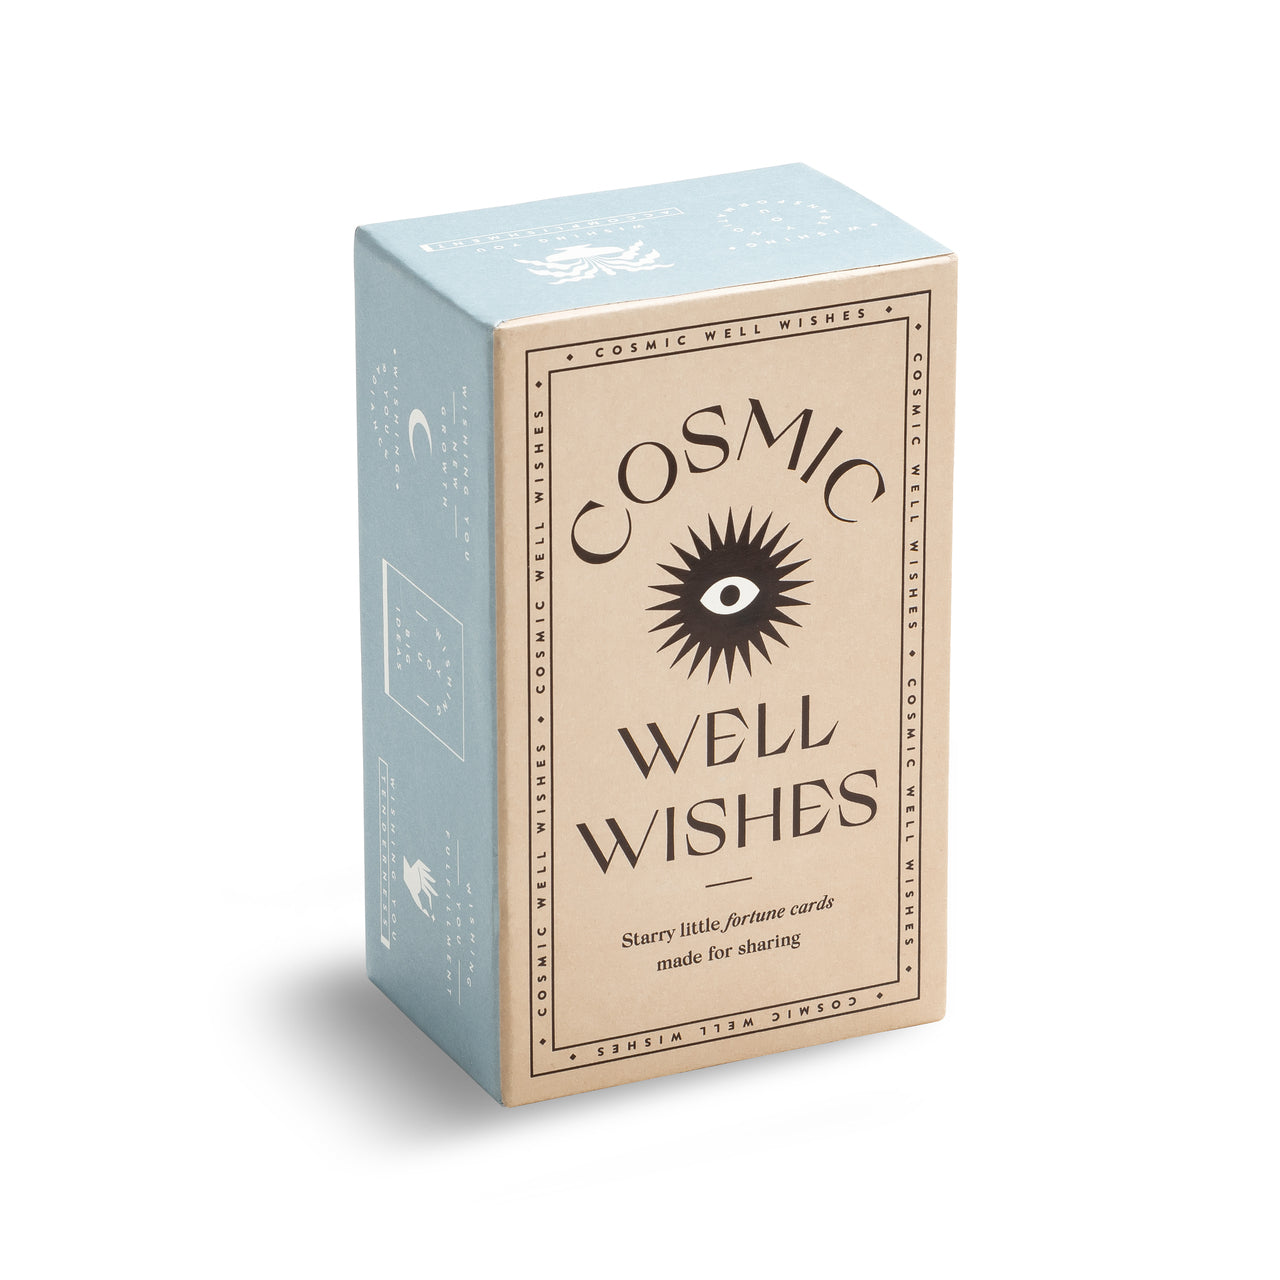 Cosmic Well Wishes